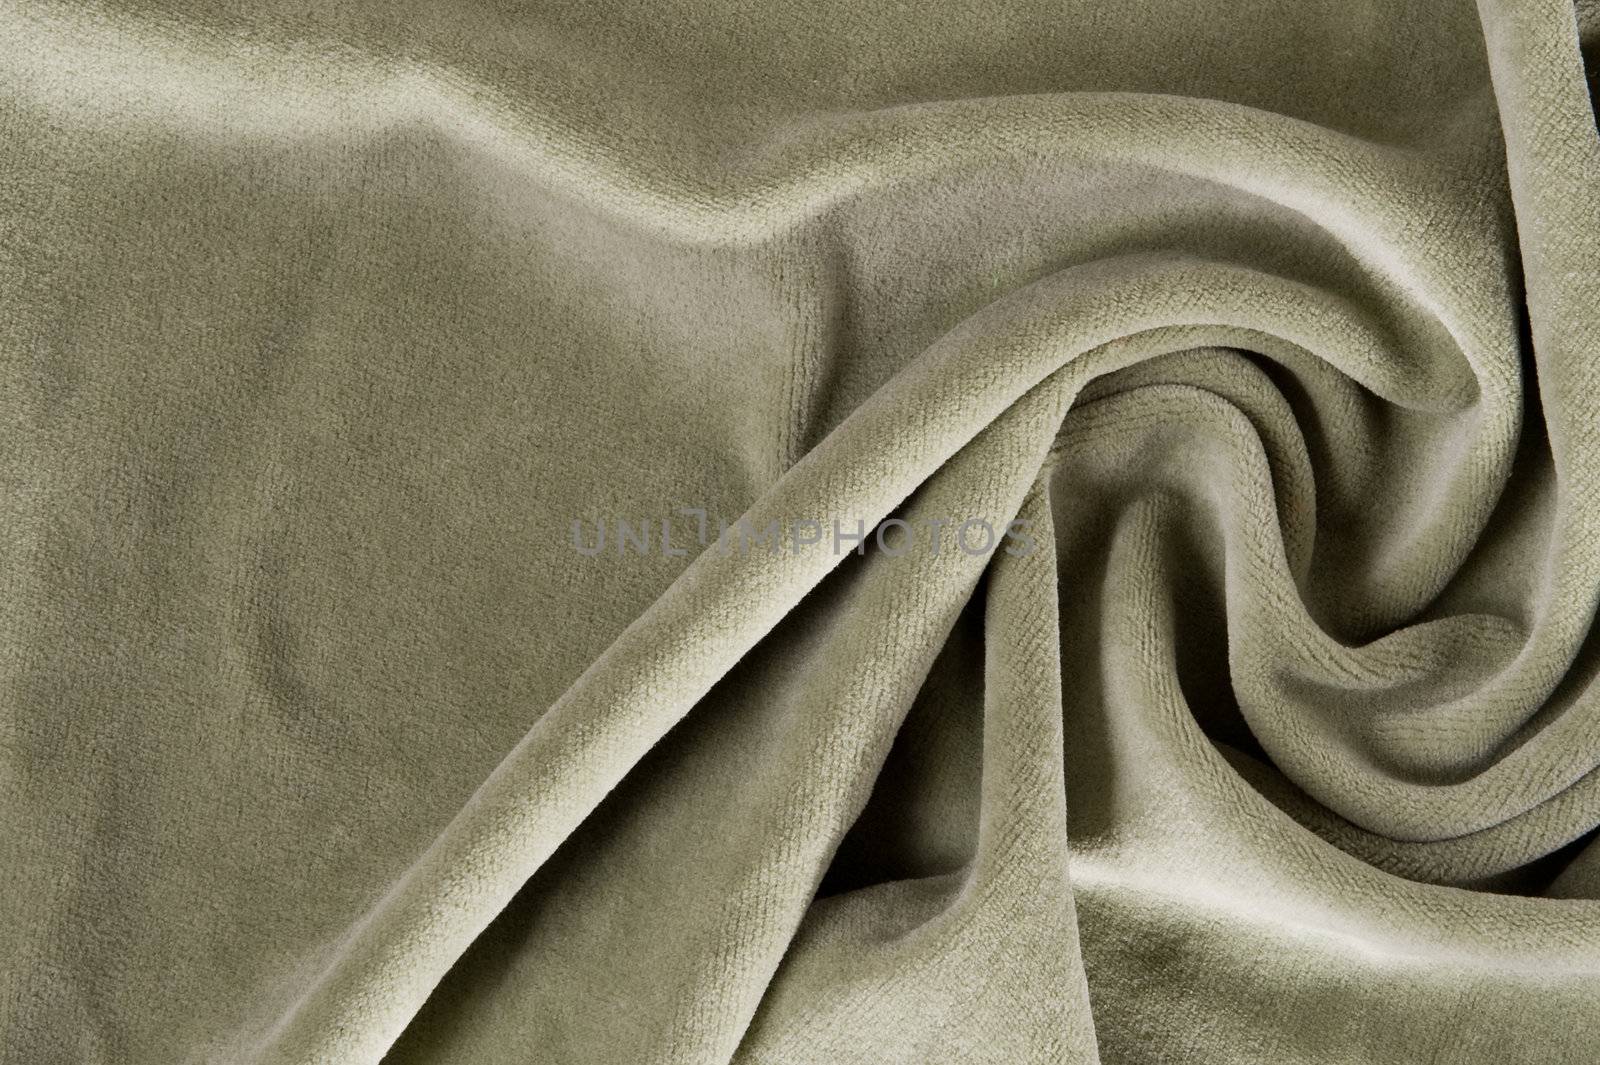 fabric for clothing velour by Garry518